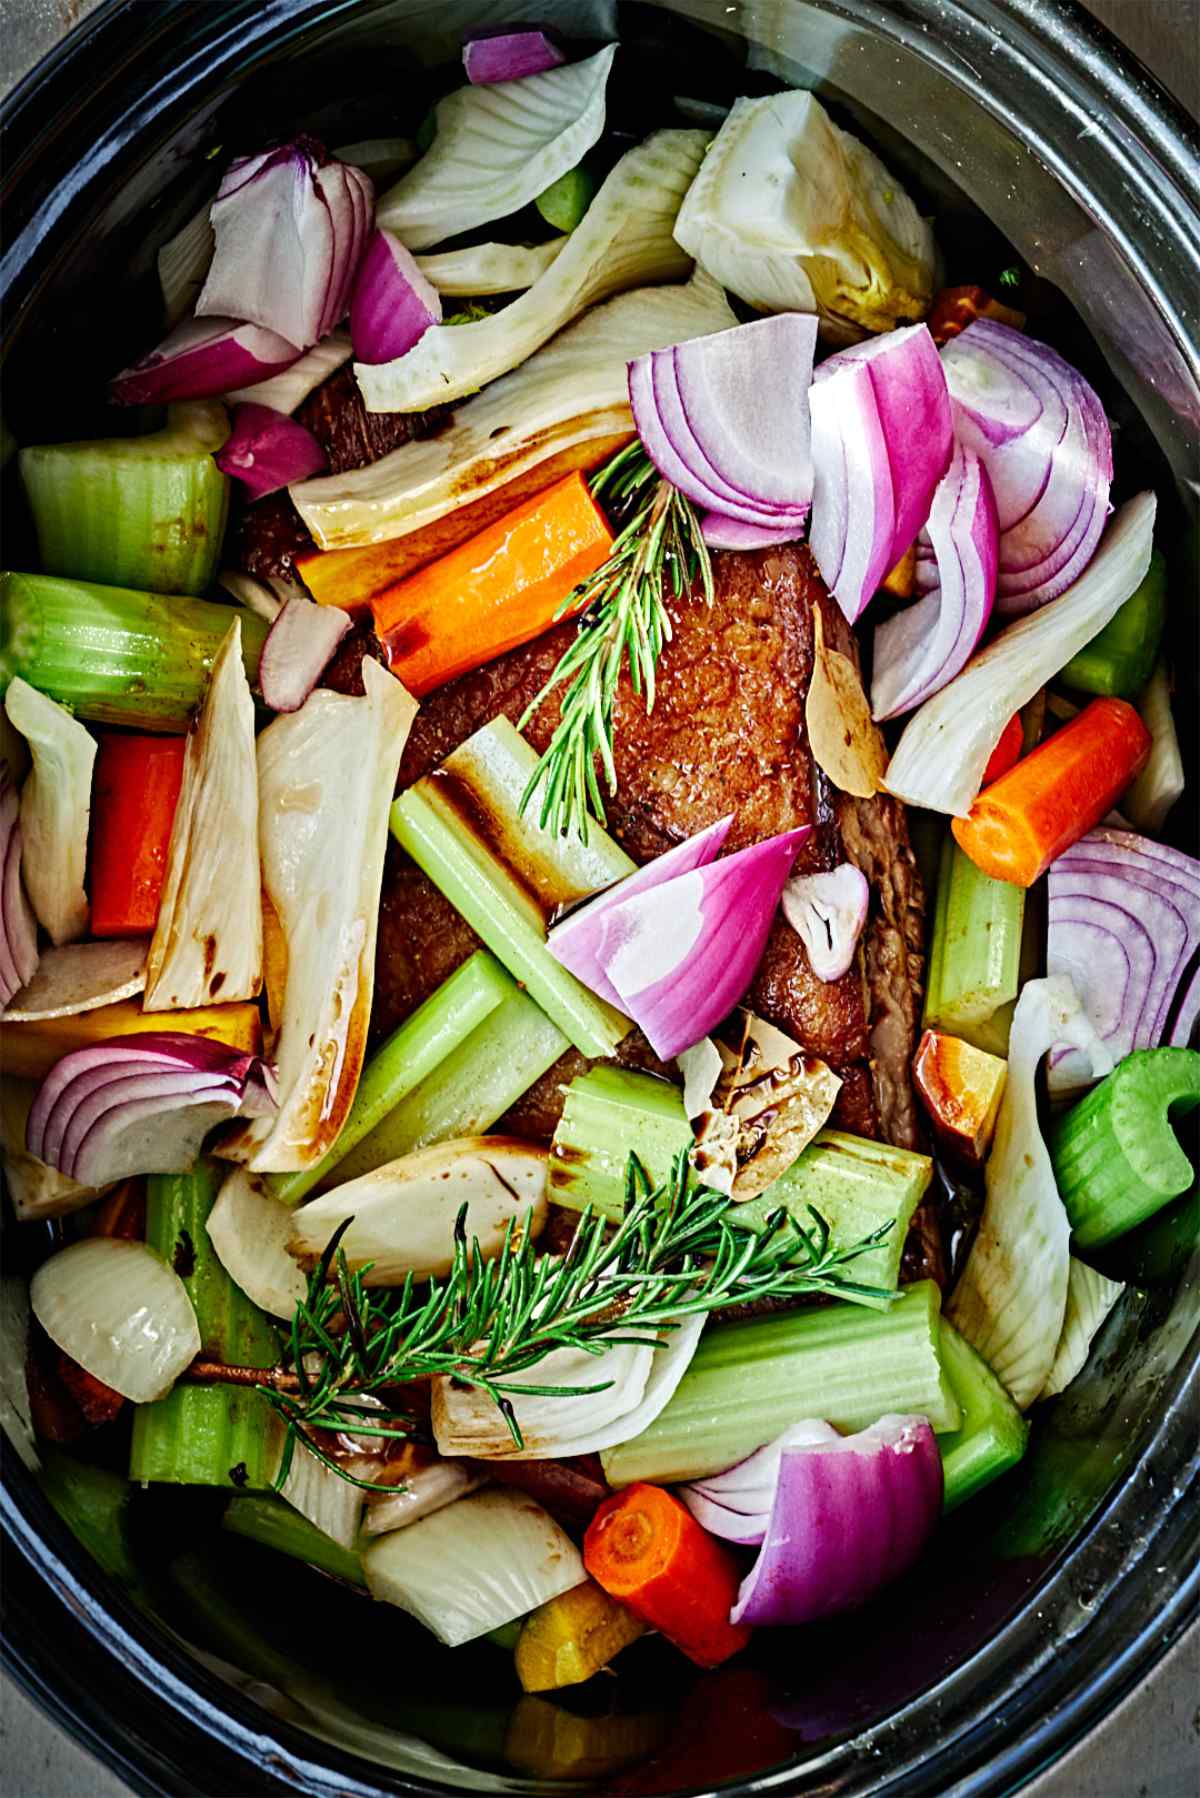 Meat and vegetables in a slow cooker.